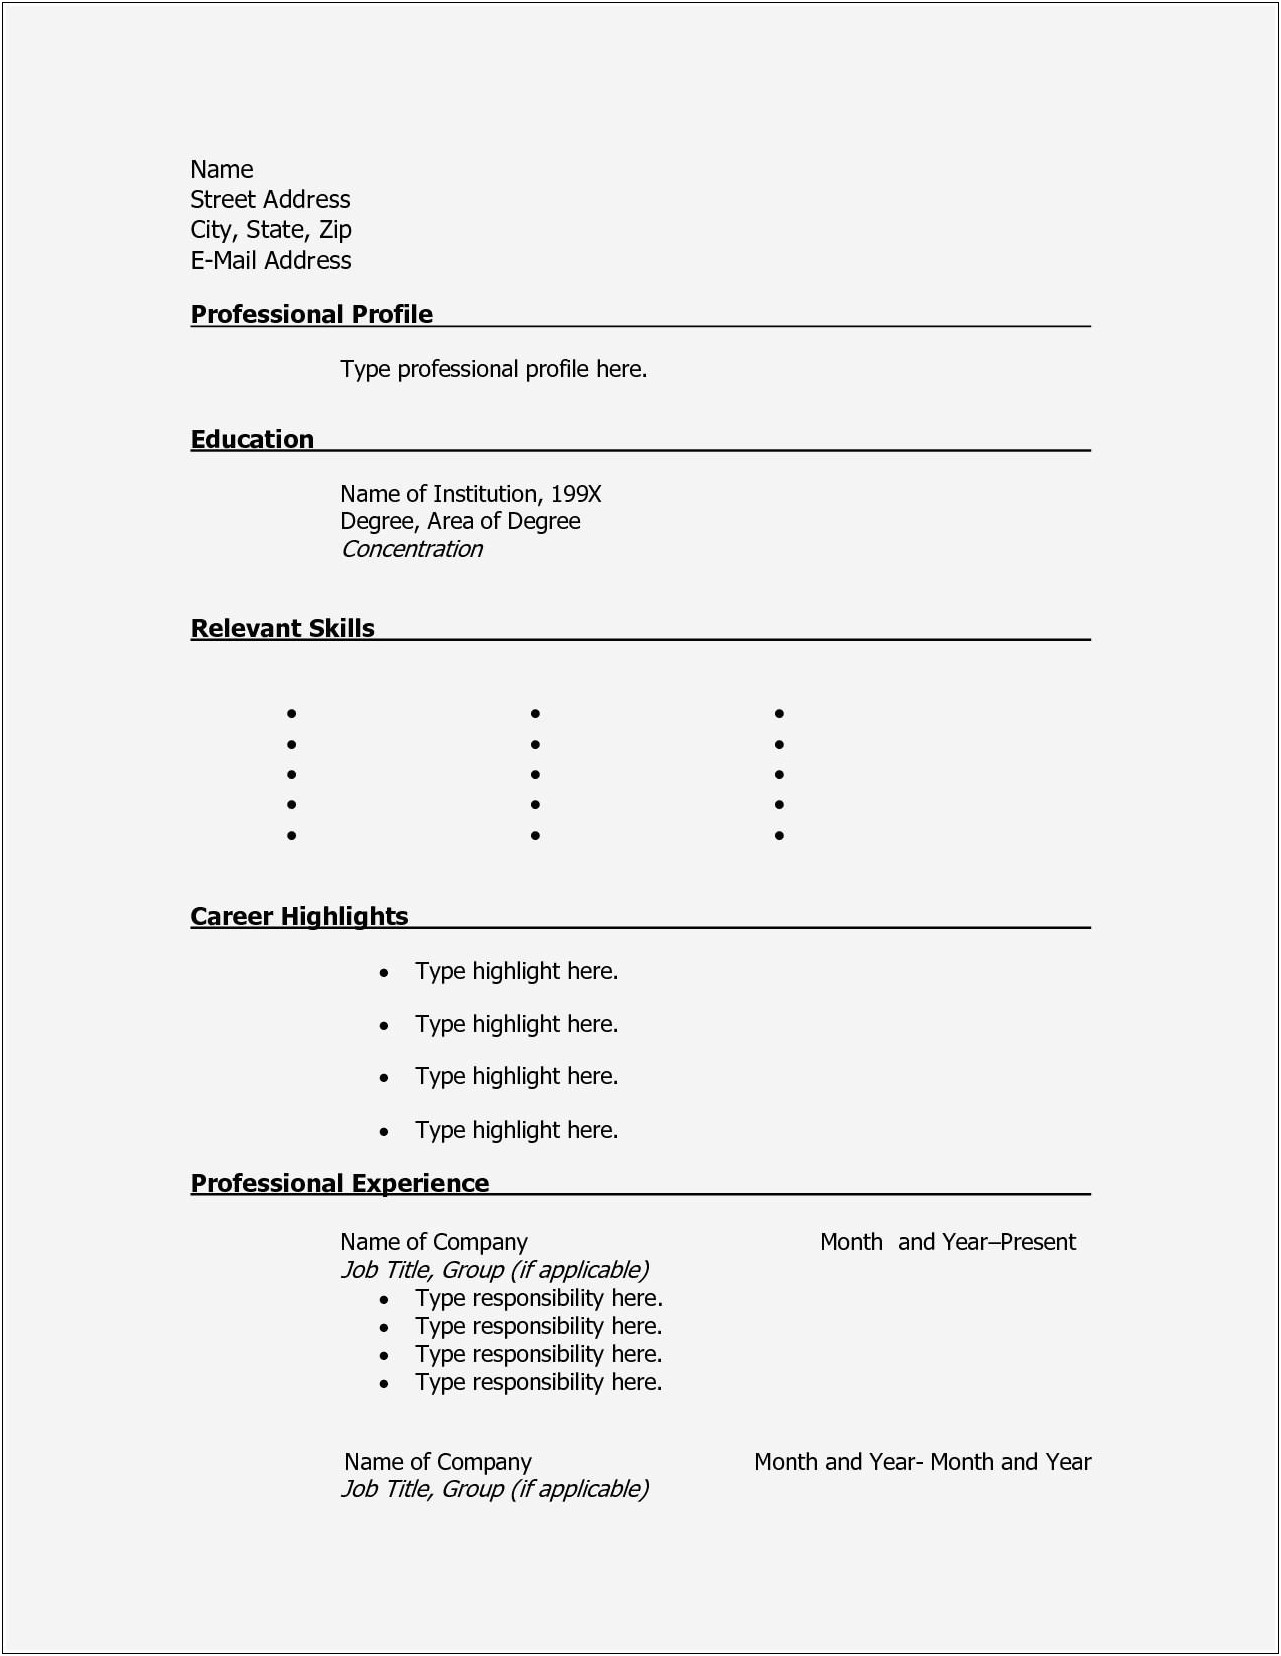 Resume Fill In The Blank Pdf Free